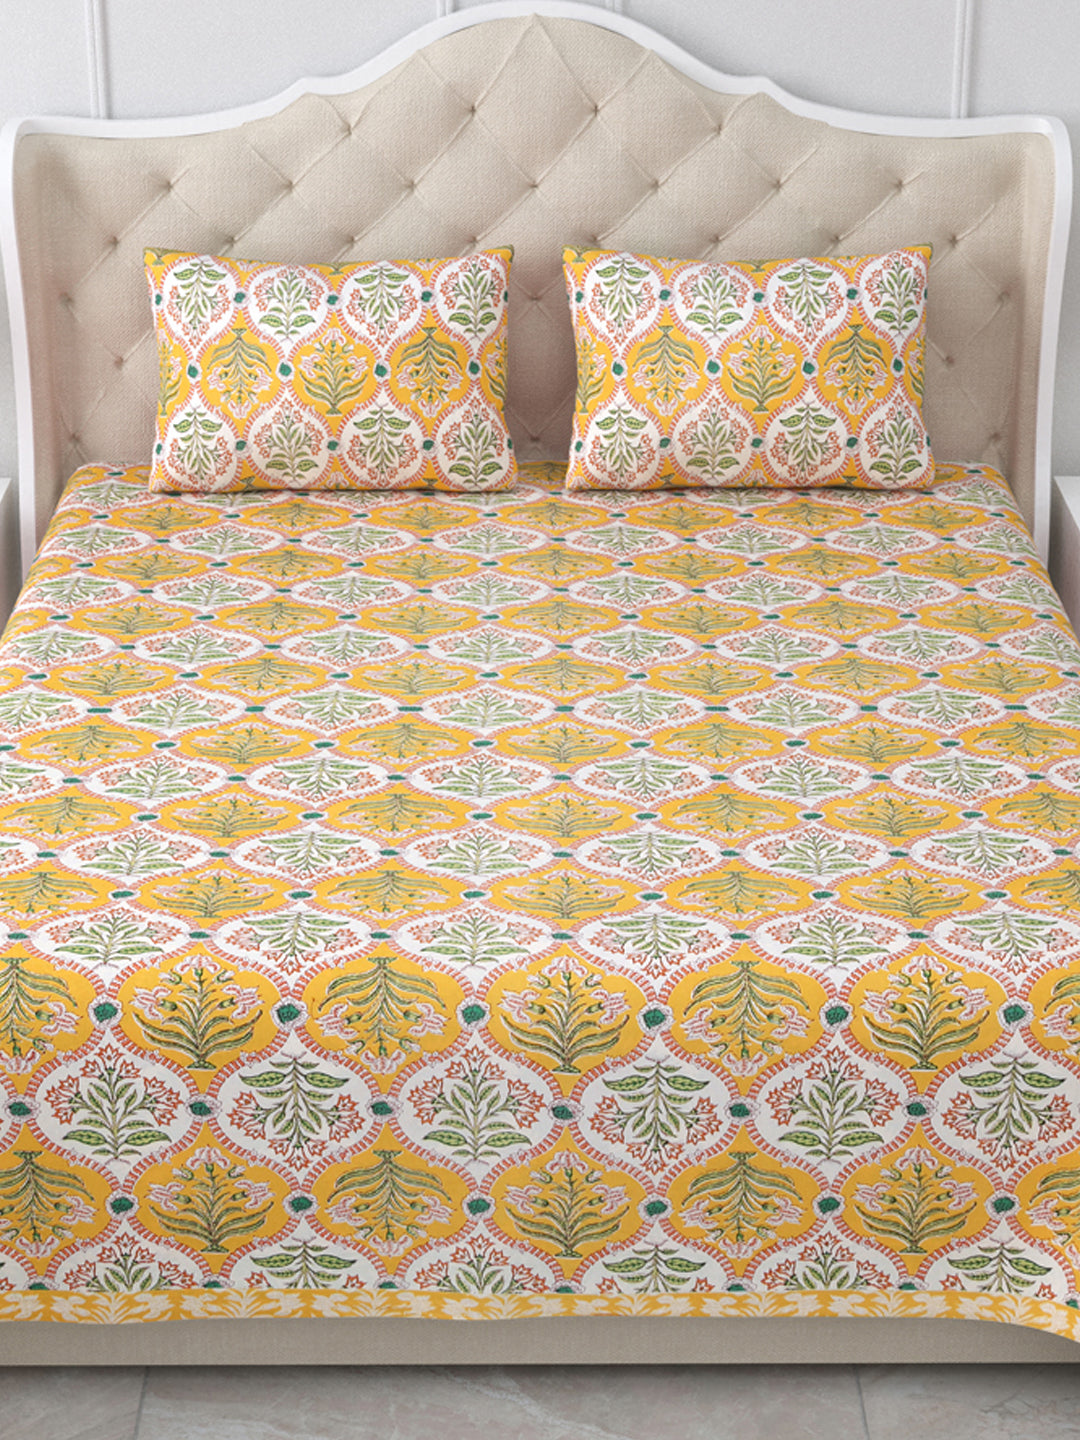 Maharani’s Dreamscapes Yellow & Green Cotton Double Bedsheet with 2 Pillow Covers